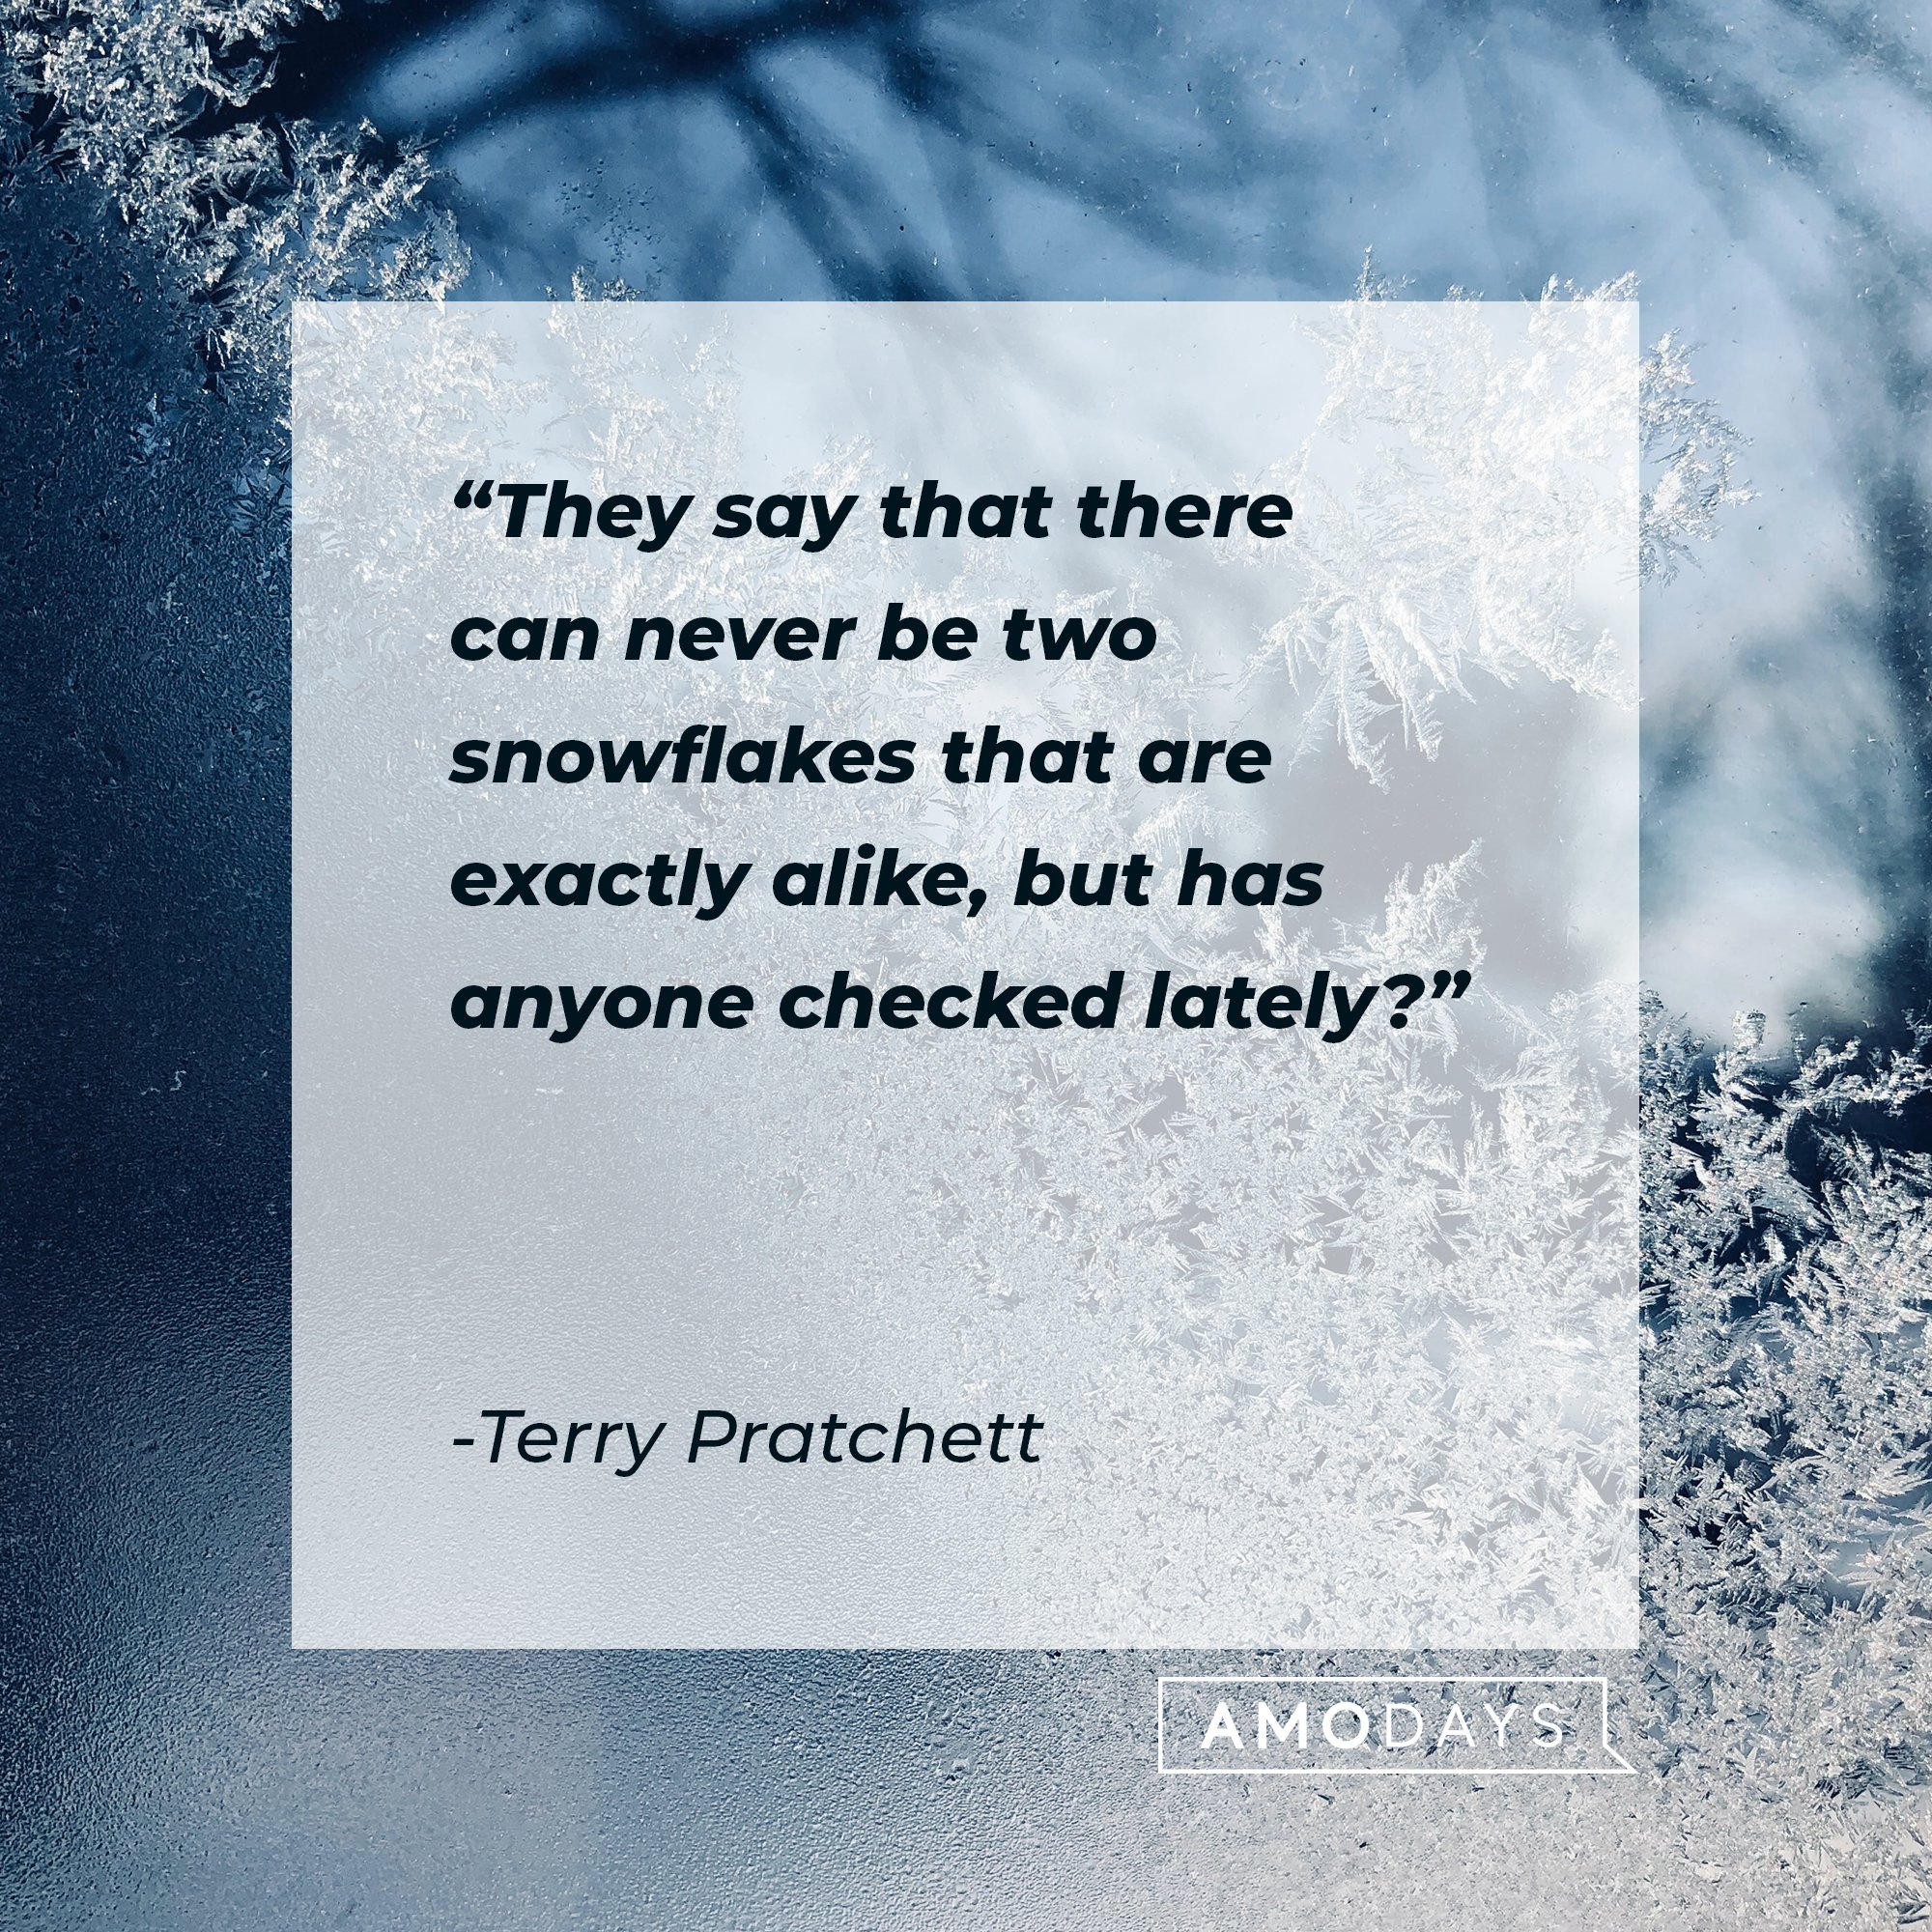  Terry Pratchett’s quote: "They say that there can never be two snowflakes that are exactly alike, but has anyone checked lately?" | Image: AmoDays